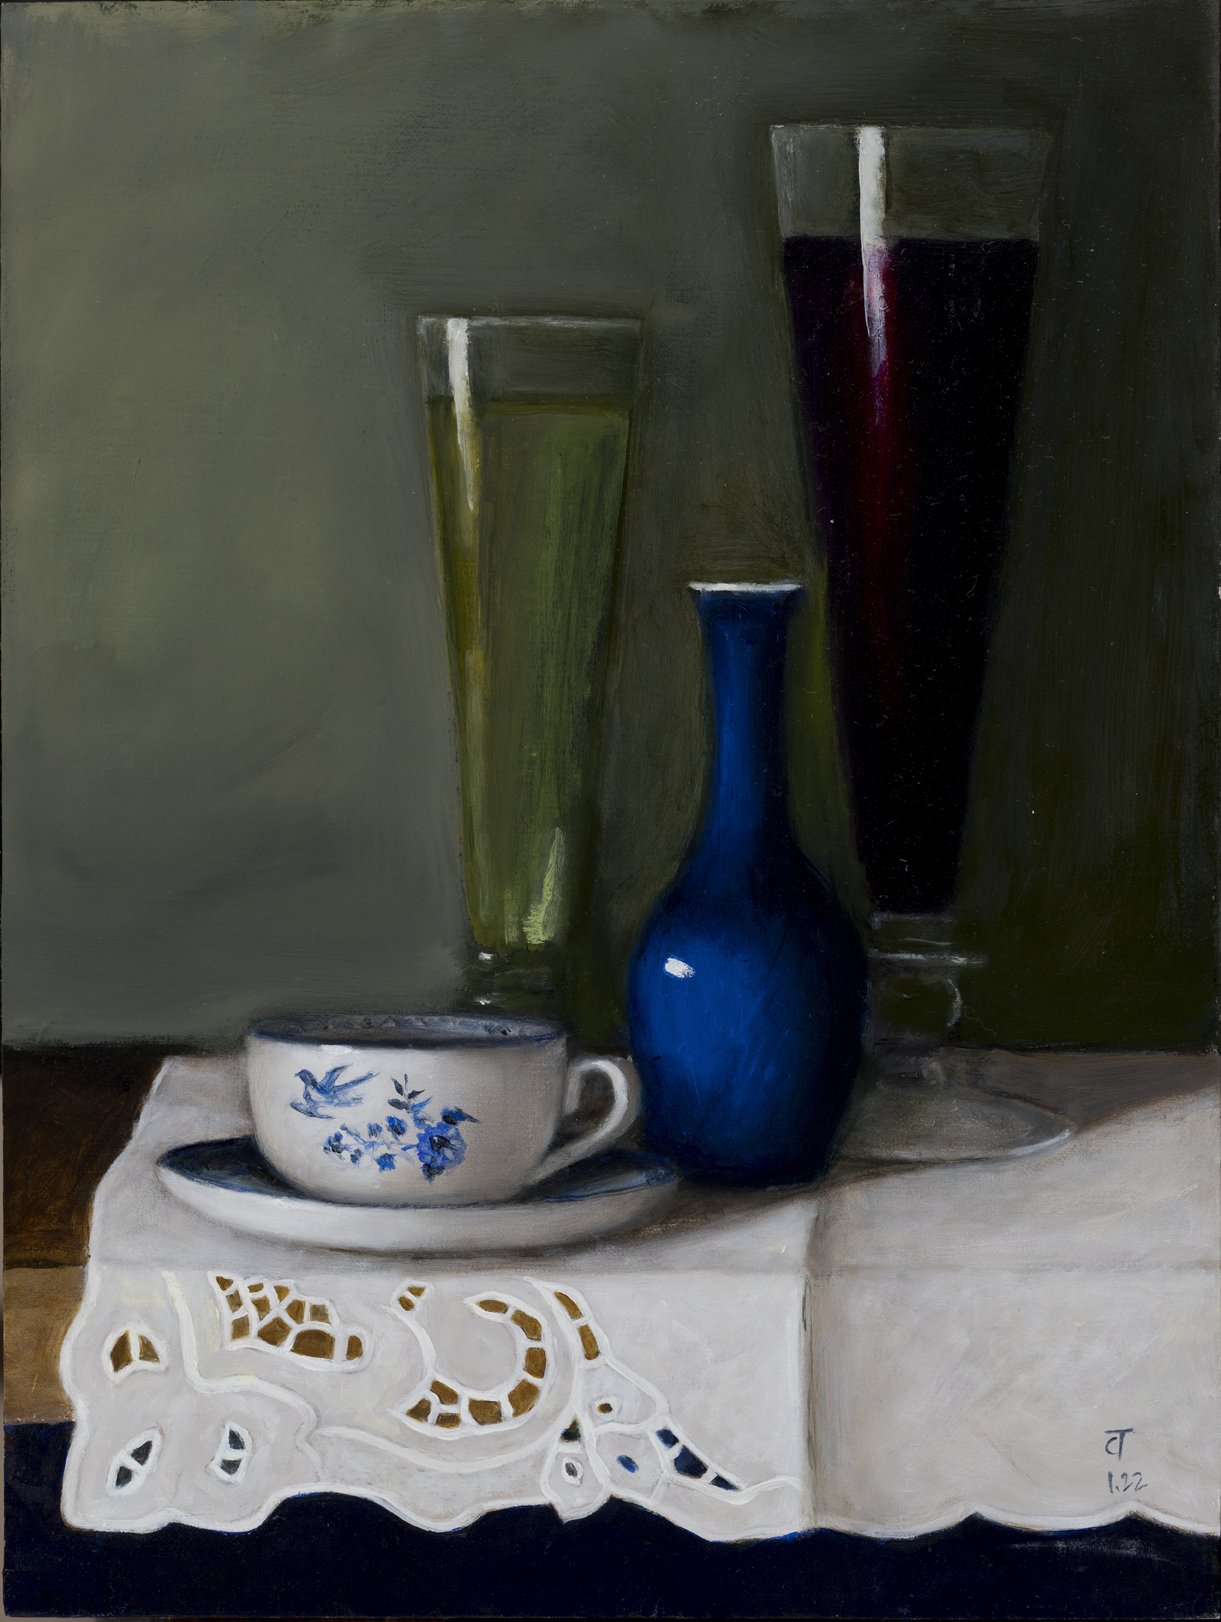 Still life with teacup and tall glasses